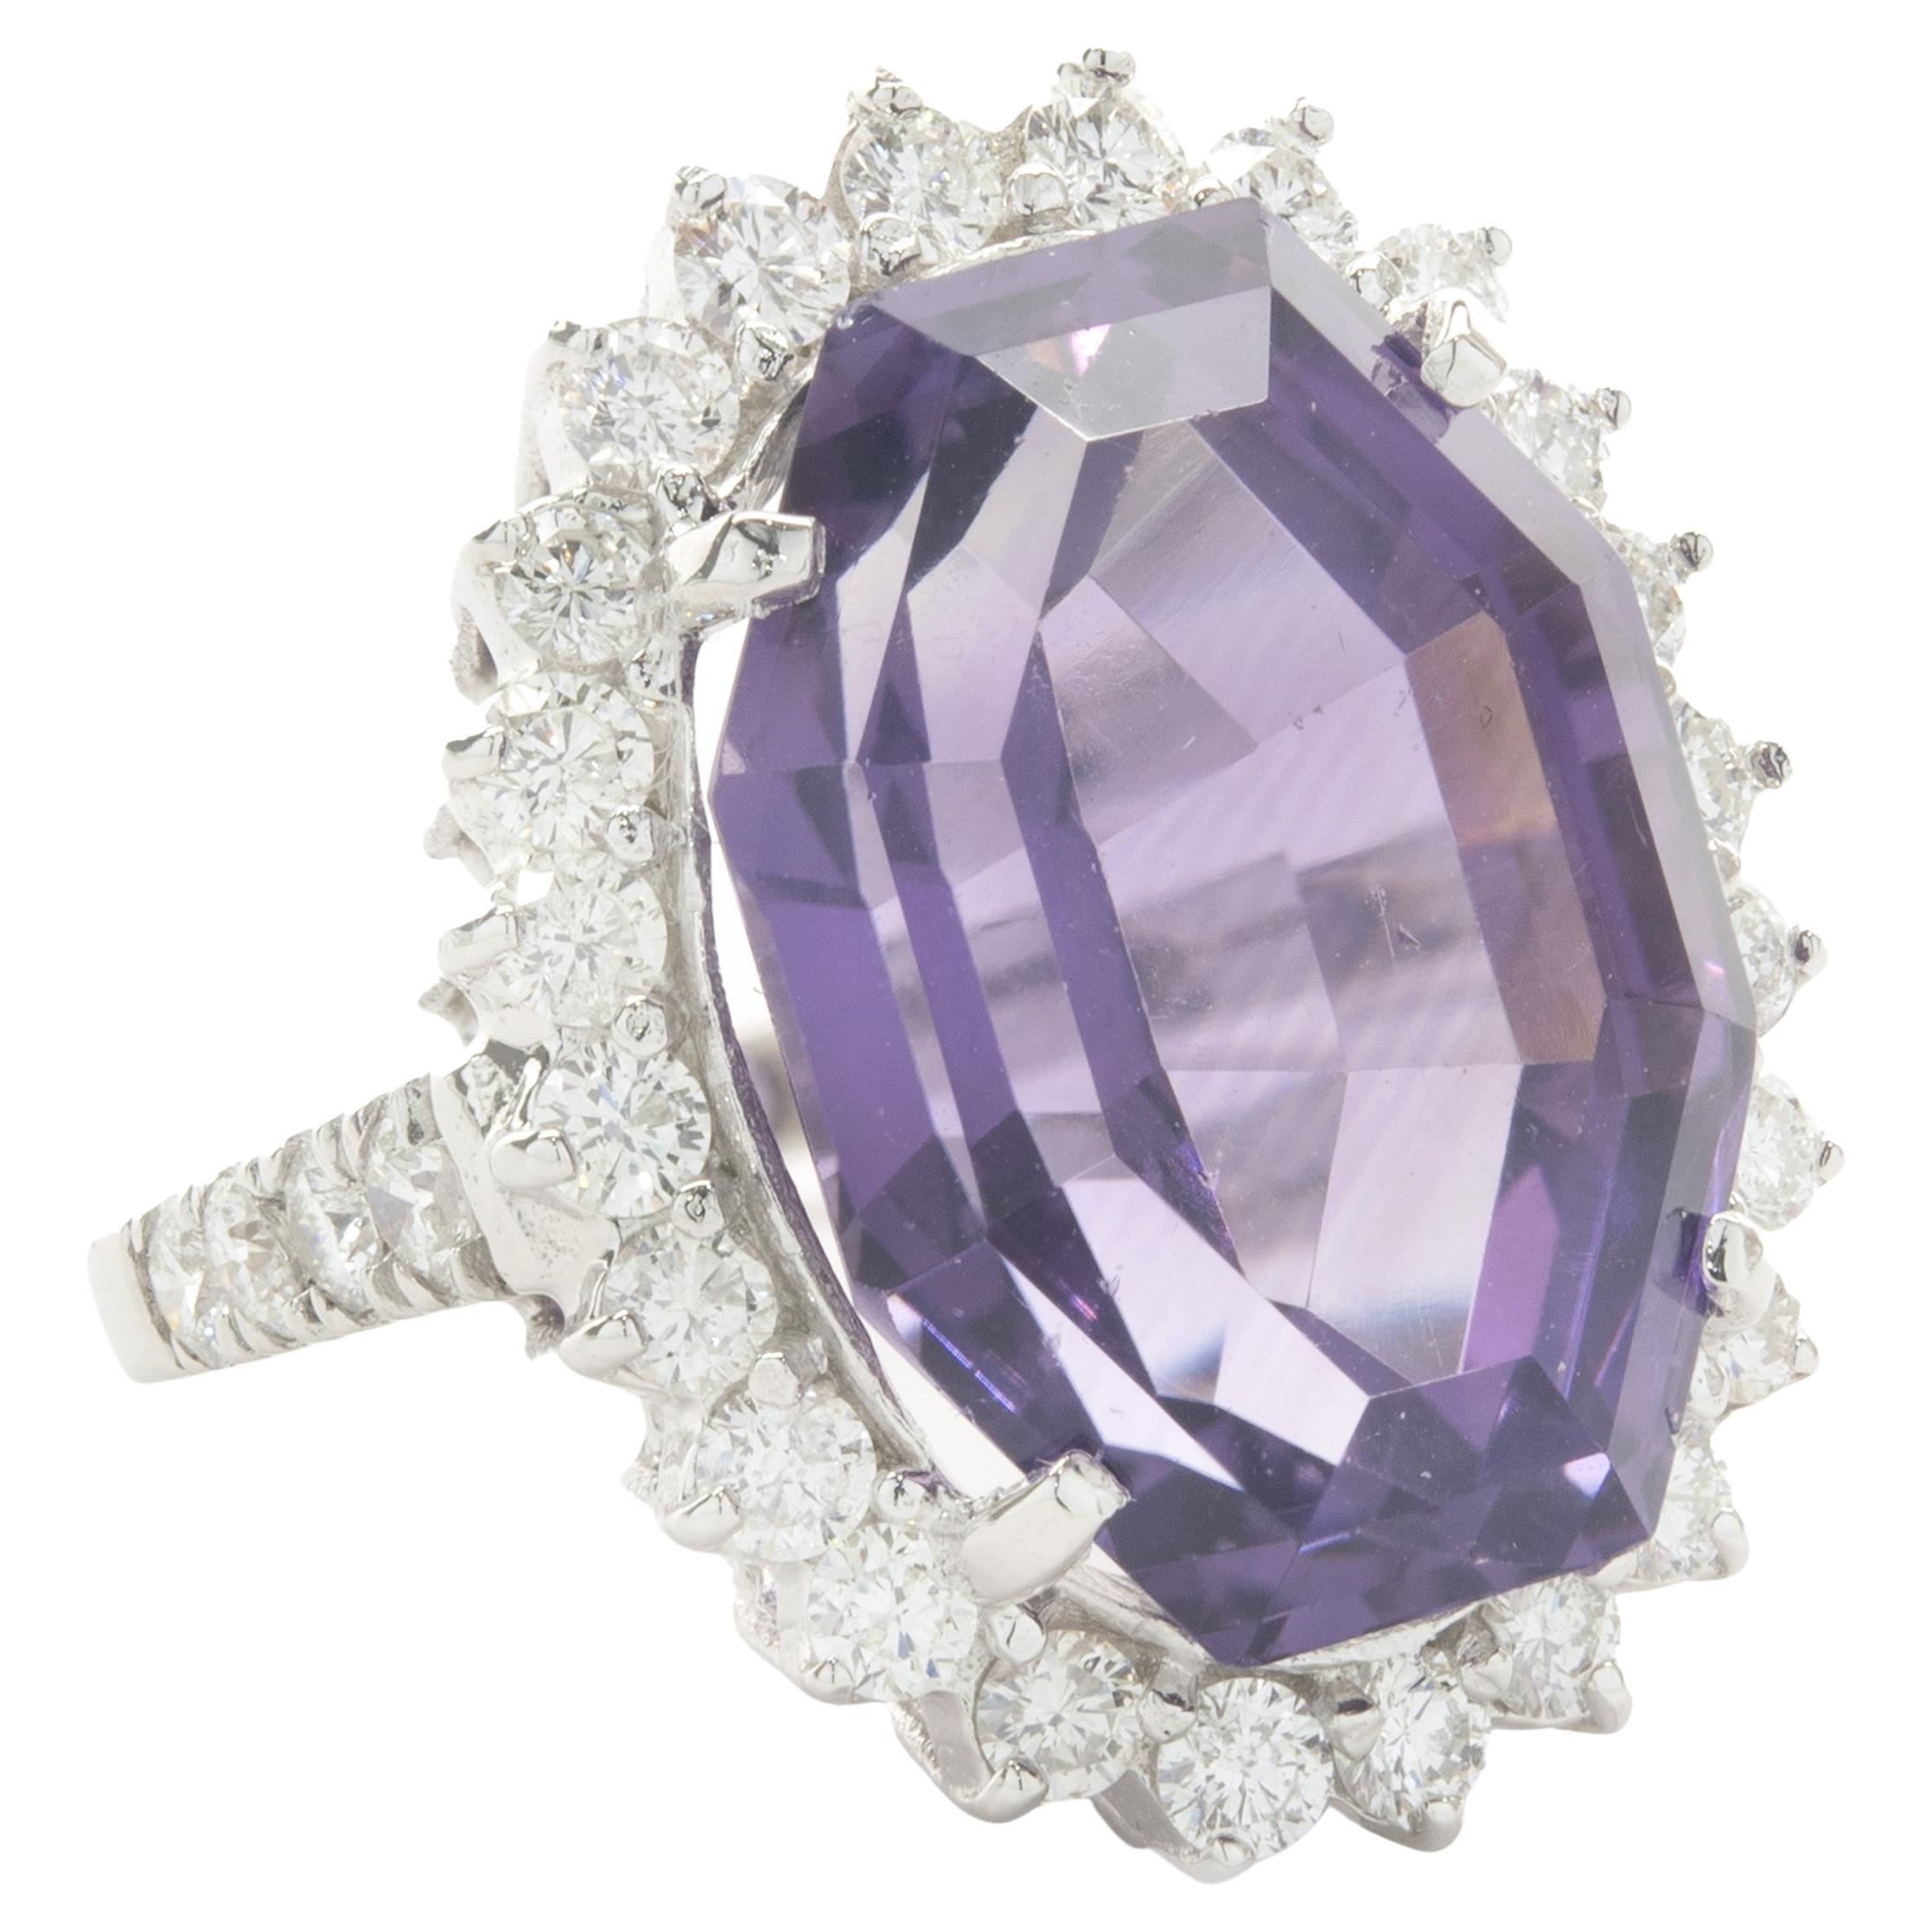 Designer: custom
Material: 14K white gold
Diamond: 24 round brilliant cut = 1.28cttw
Color: H
Clarity: VS2
Amethyst: 1 oval cut = 14.81ct
Ring Size: 6.5 (please allow up to 2 additional business days for sizing requests)
Weight:  9.04 grams